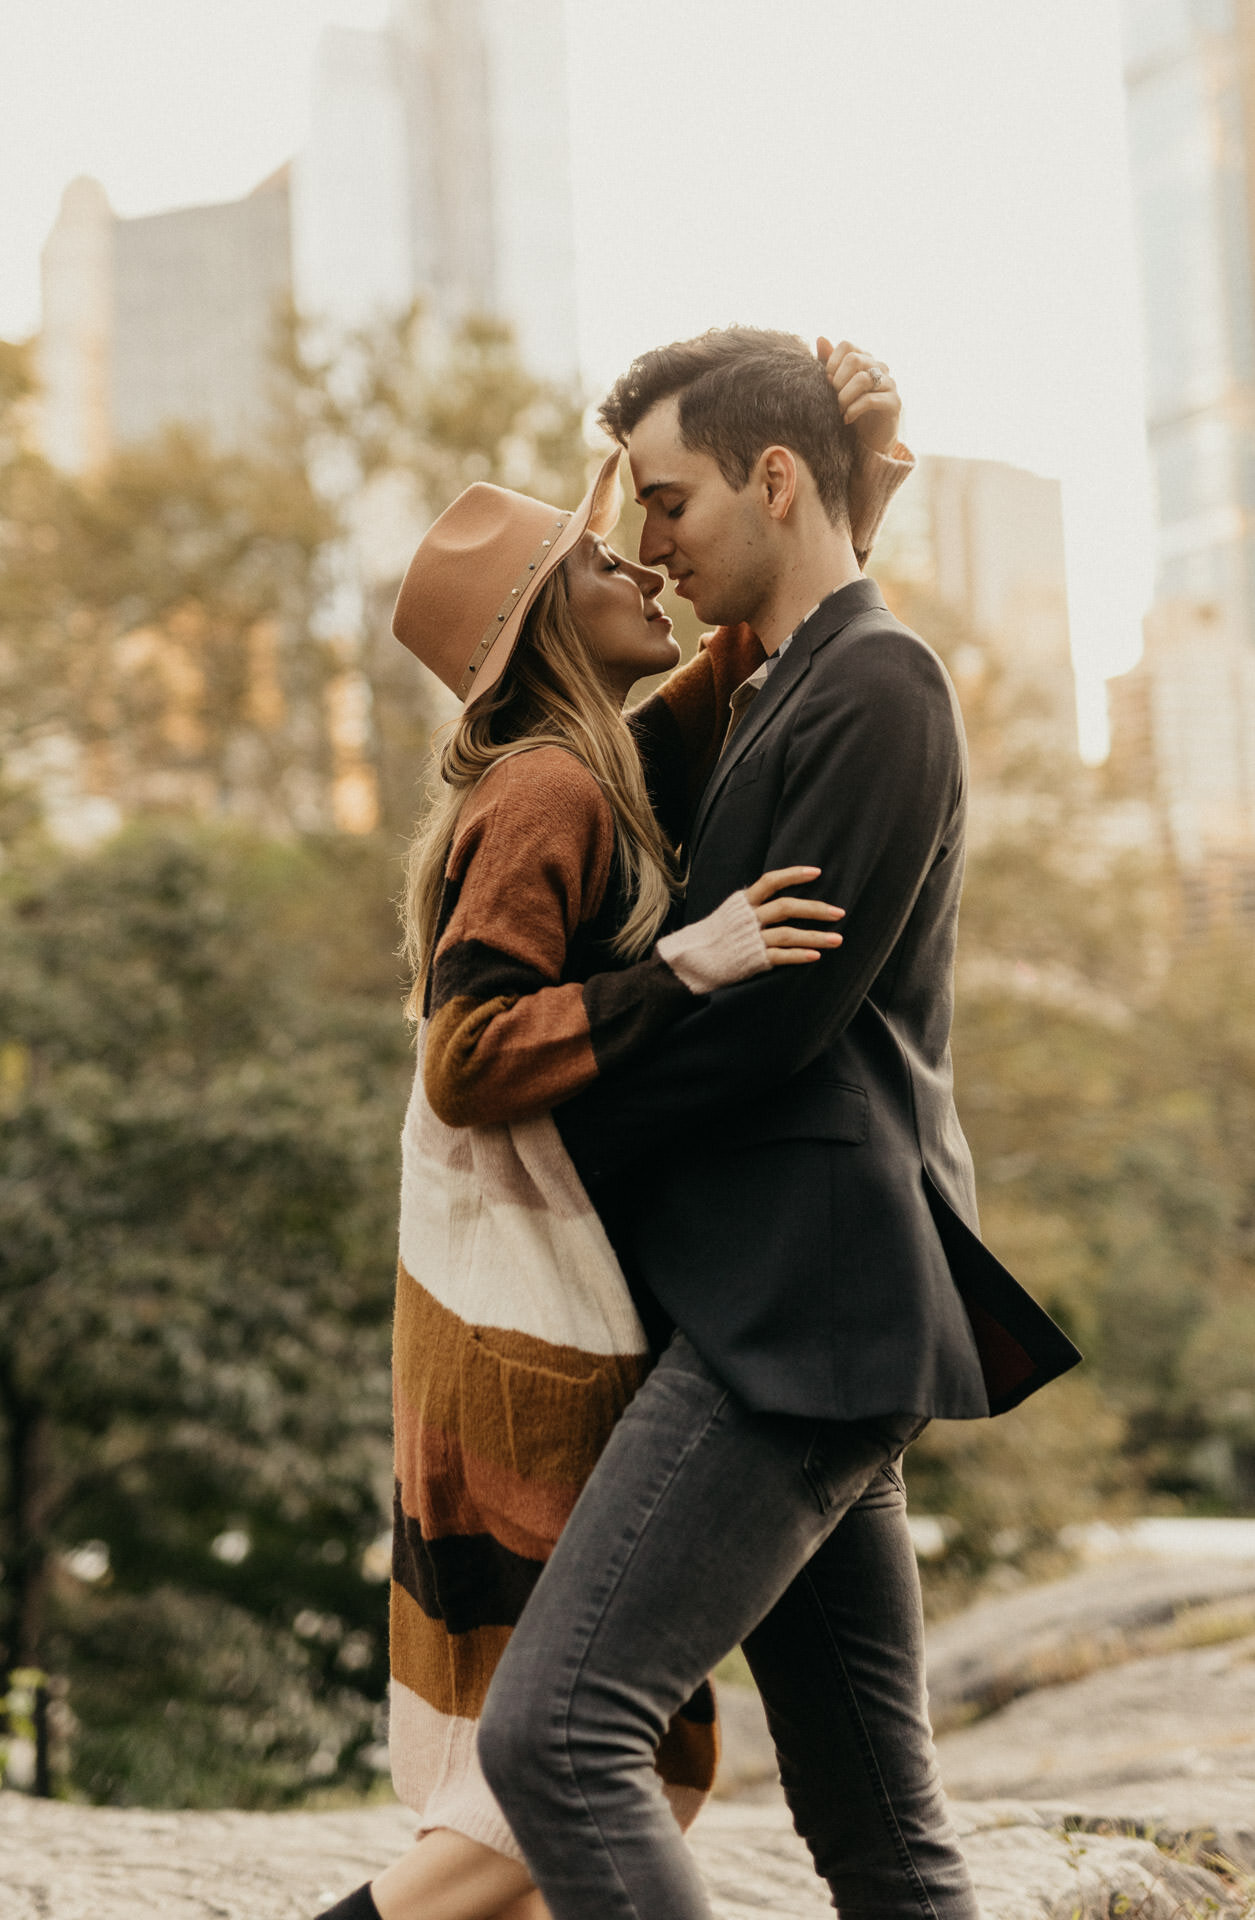 fall-october-new-york-central-park-couples-engagement-session-photographer-houston